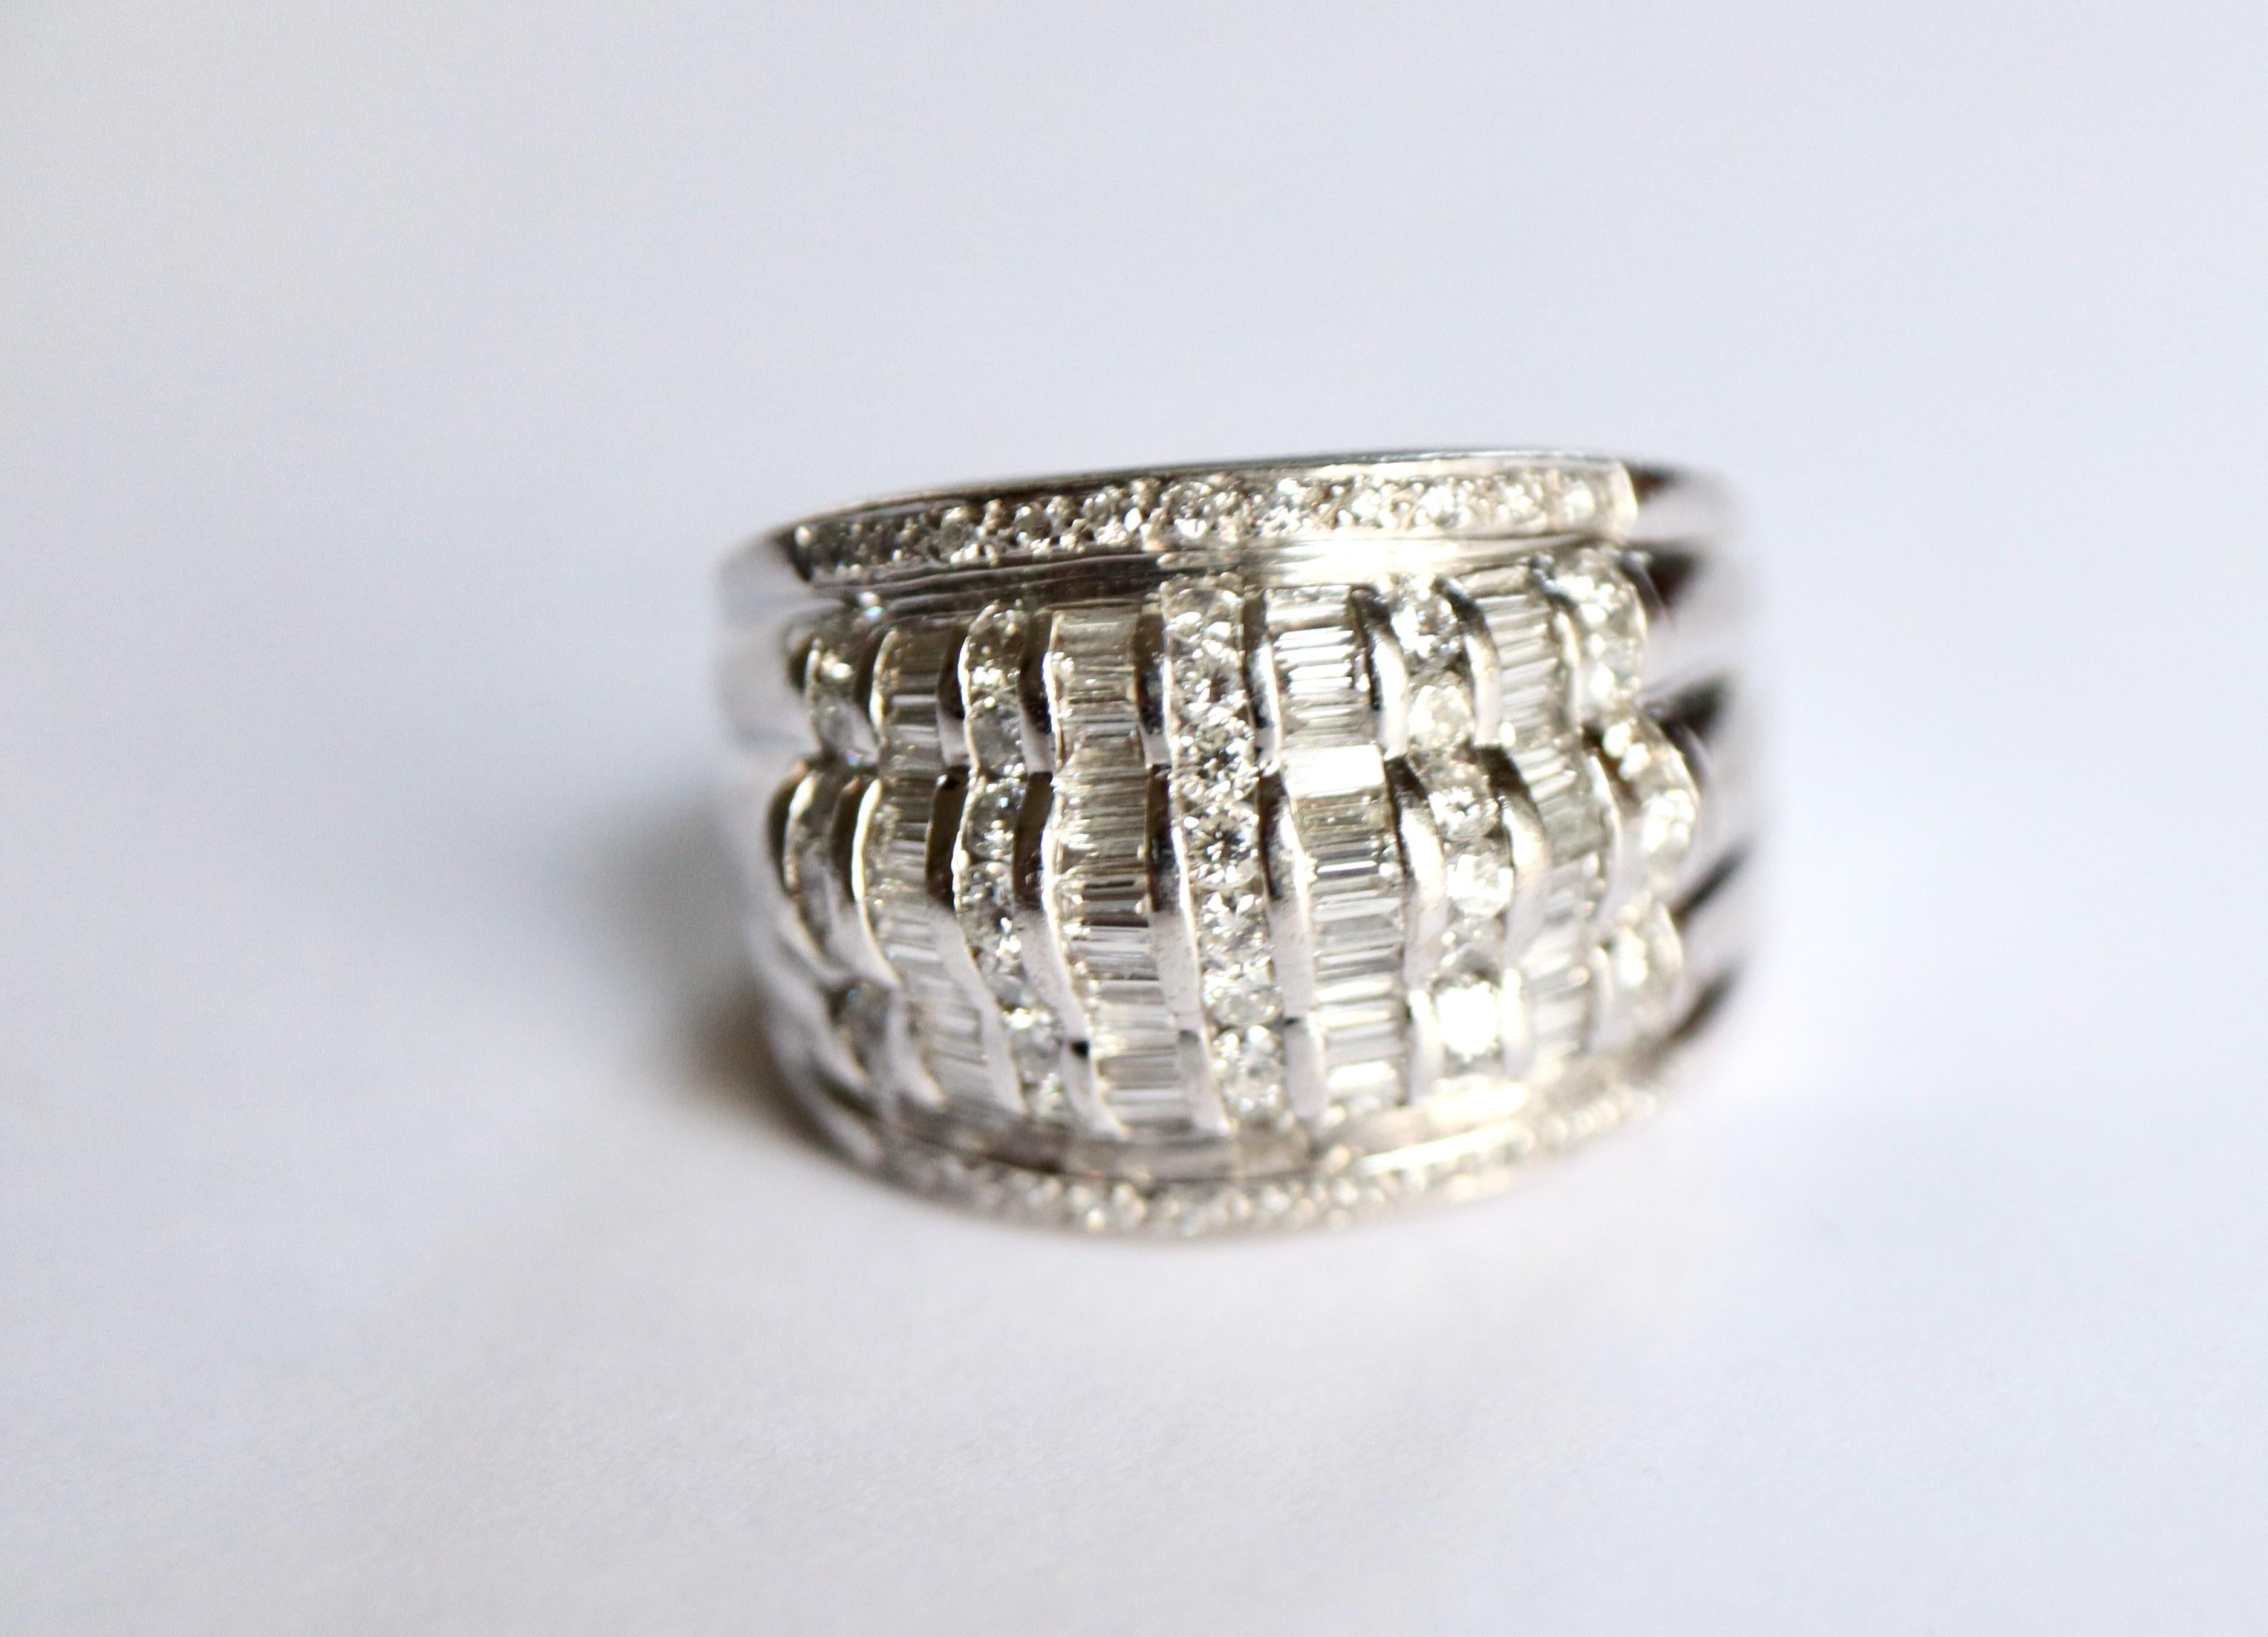 18-karat white gold and diamond ring. Garter ring with 5 rows of round diamonds and 4 rows of baguette diamonds occupying the front of the ring. All of these rows are surrounded by lines of round diamonds on both edges of the ring. Total weight of